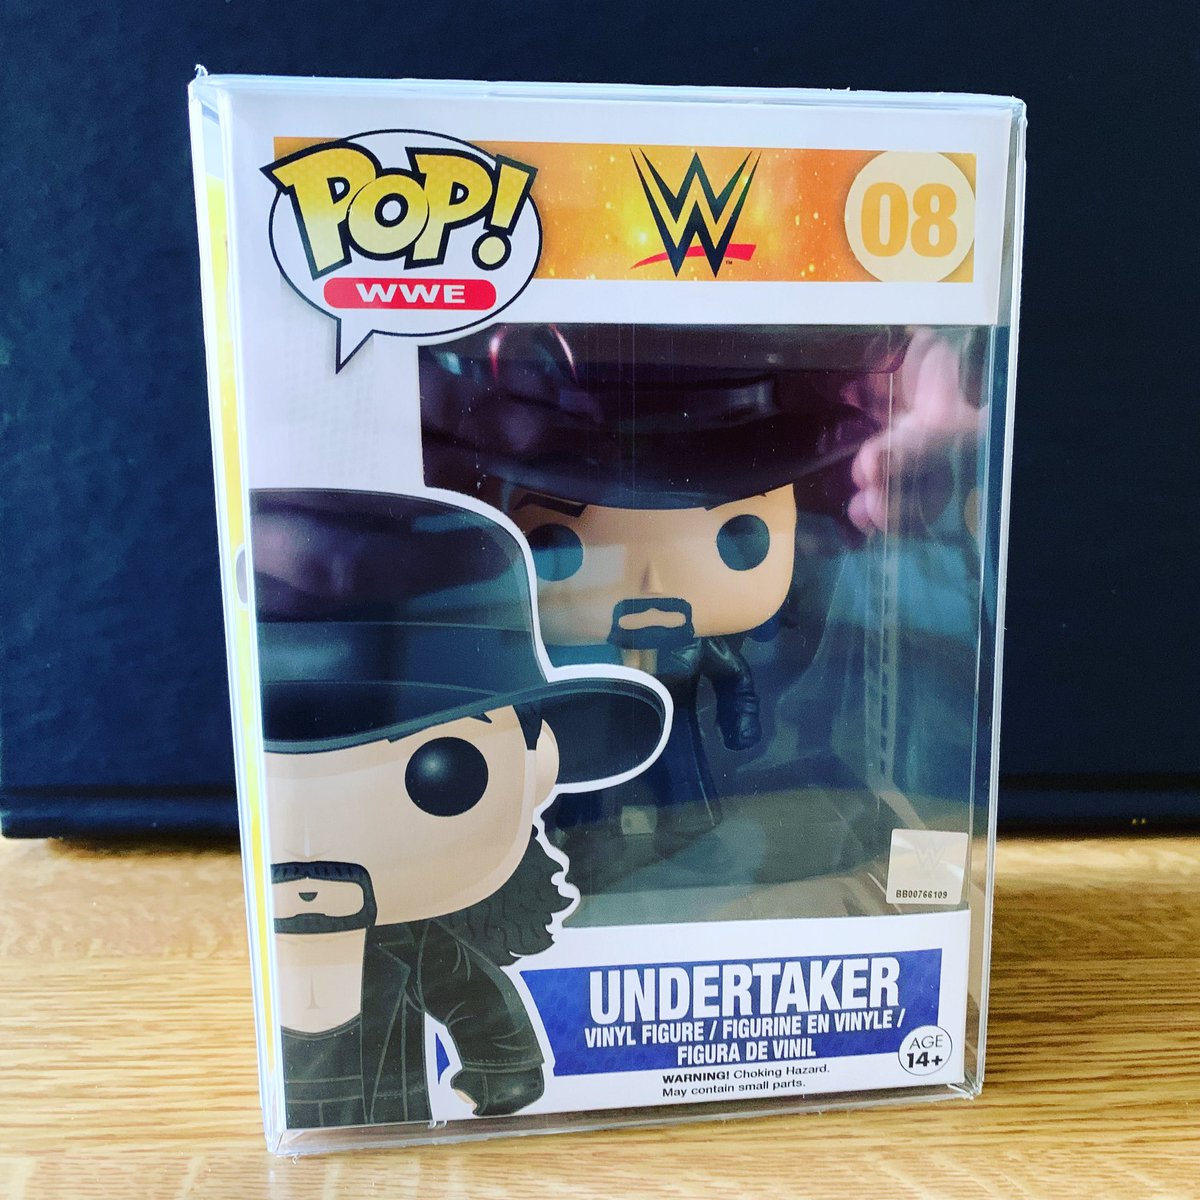 Finally added the vaulted Underaker (No08) to my WWE Funko Roster 😁🤘🏻

#WWE #undertaker #wwefunko #wwefunkopop #funkopopuk #wwecollection #wwecollector #wwefan